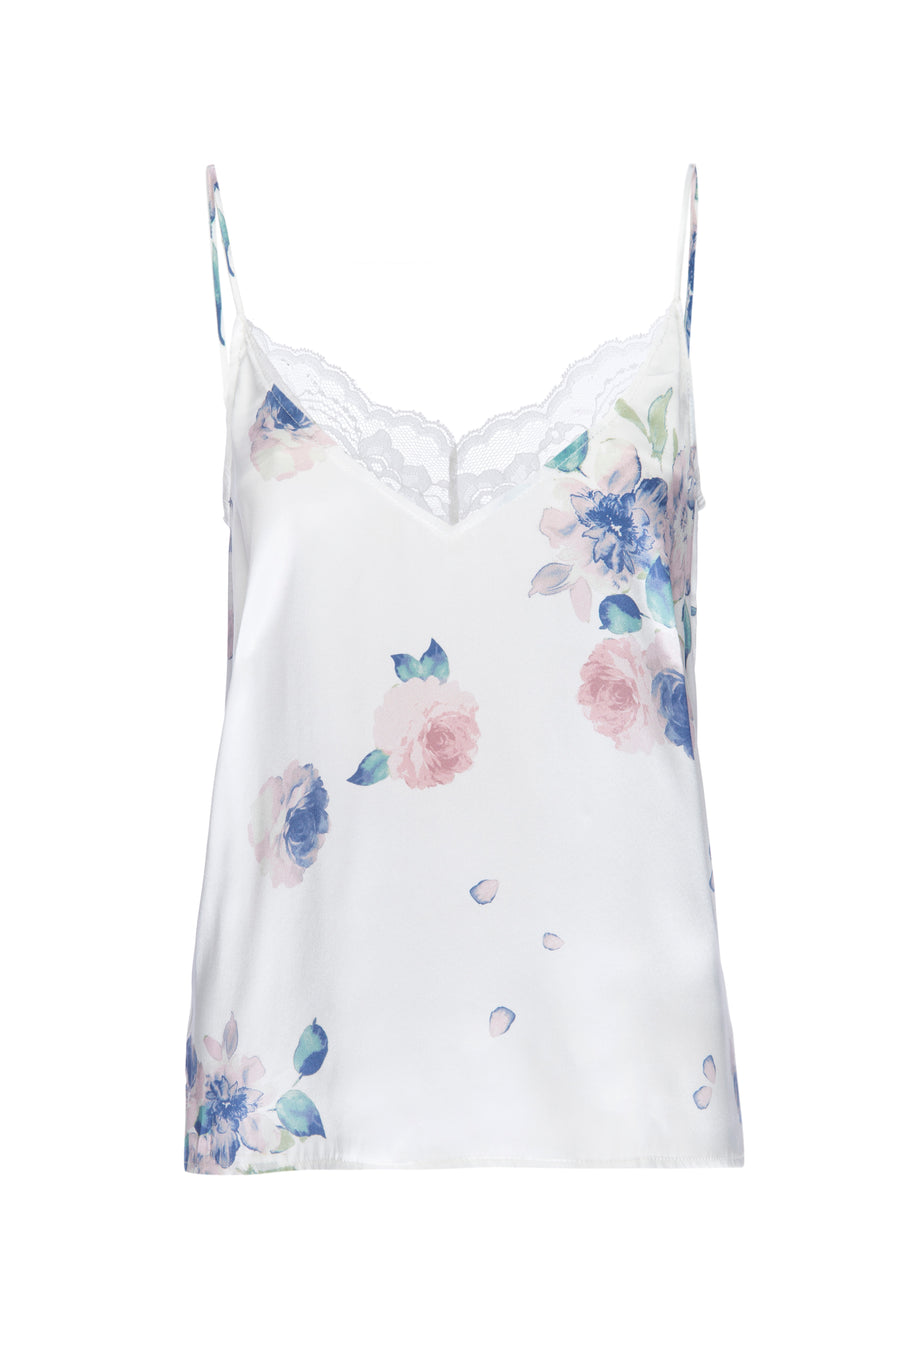 Silk Charmeuse Tank with Lace: Ivory Floral Print